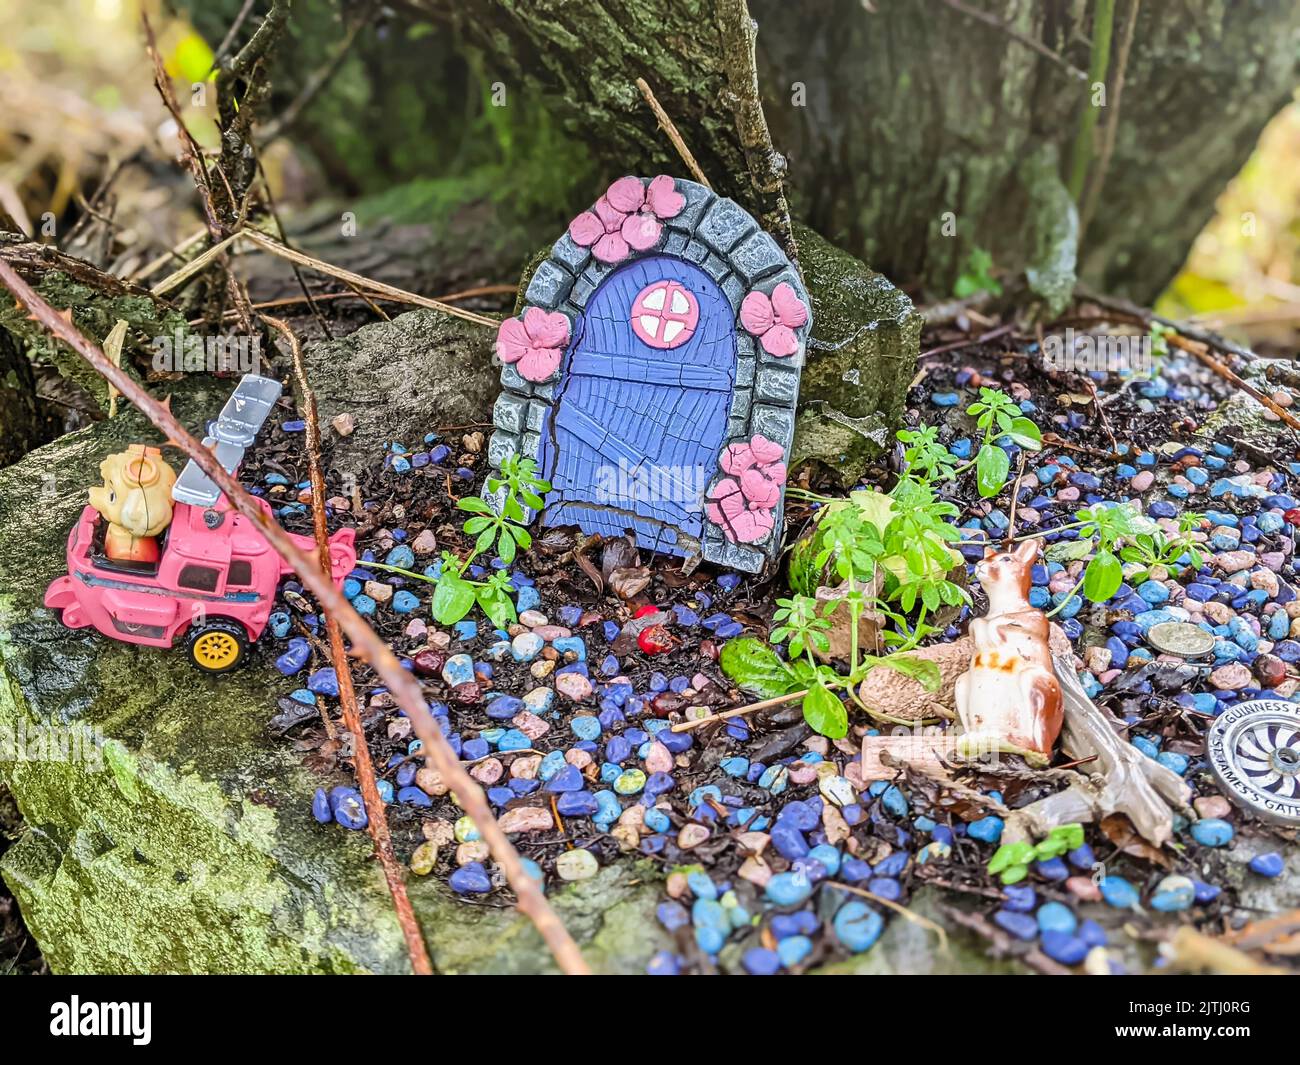 Gifts including fairy doors, statue of a kangaroo, and a toy helicopter left by visitors at a 'fairy trail', Northern Ireland. Stock Photo